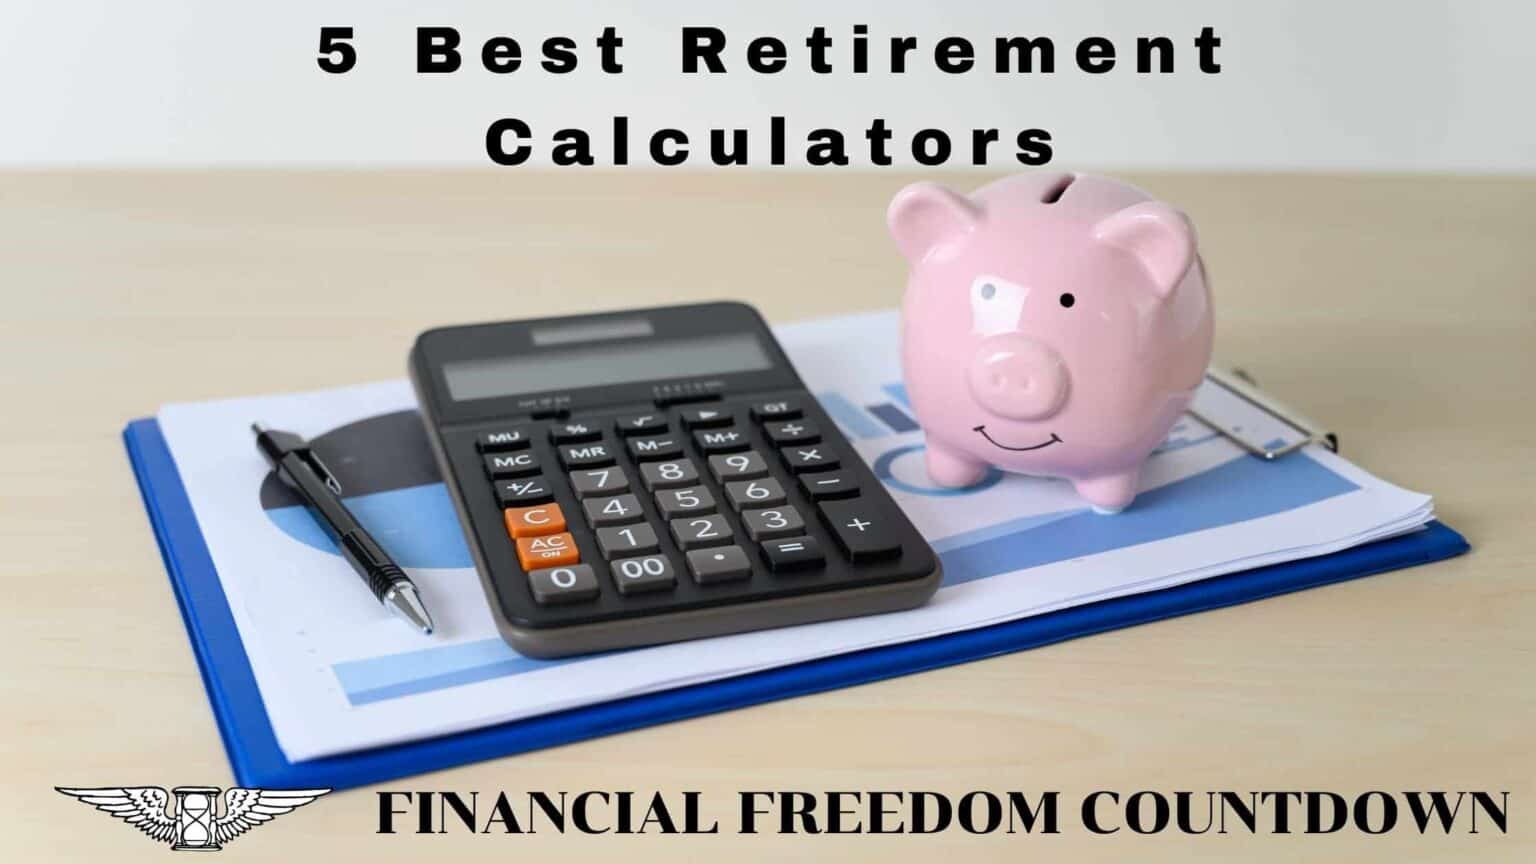 5-best-retirement-calculators-which-are-totally-free-financial